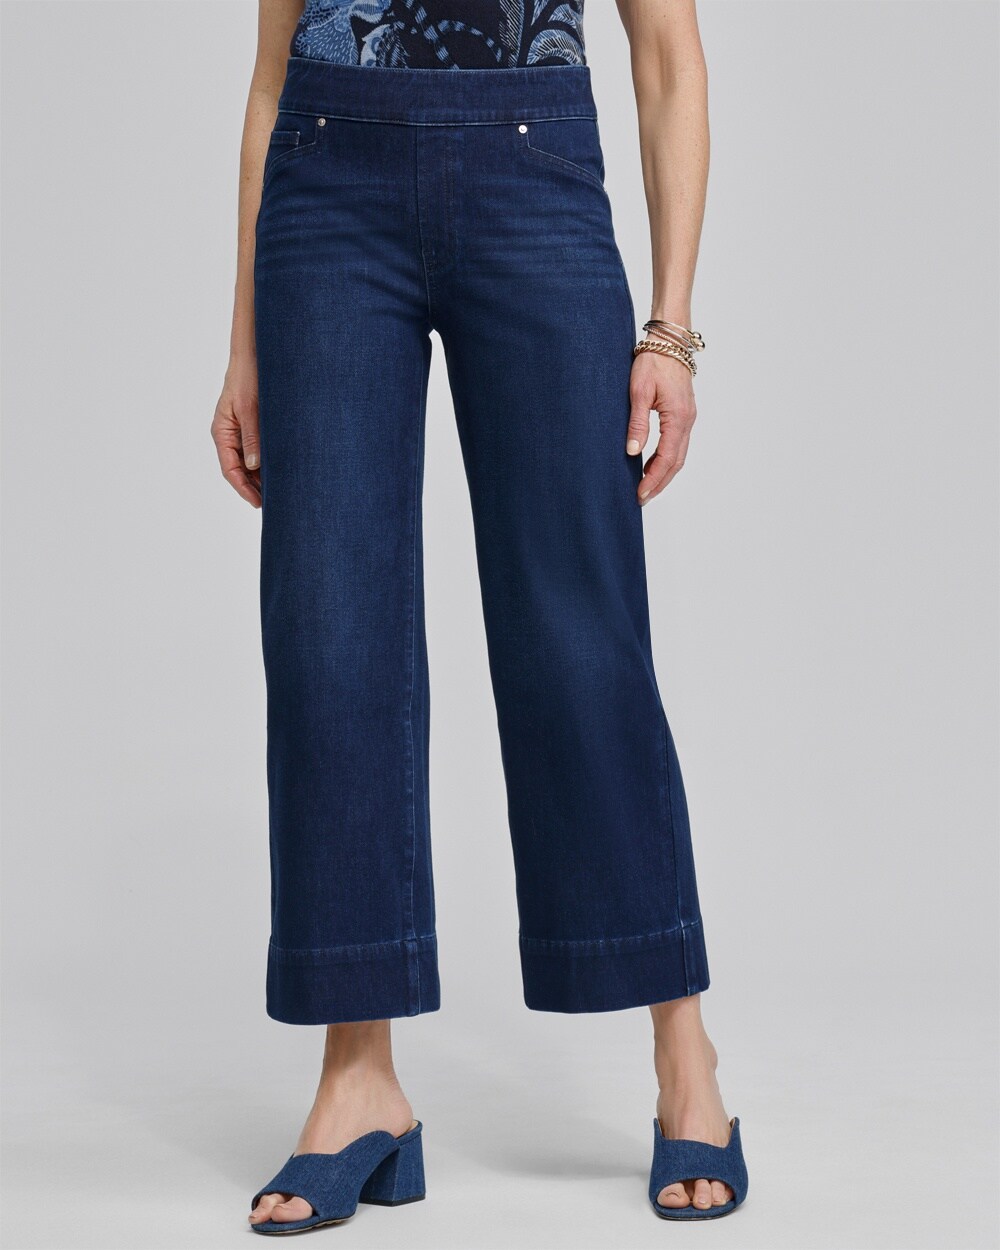 Petite Travelers Pull On Cropped Jeans